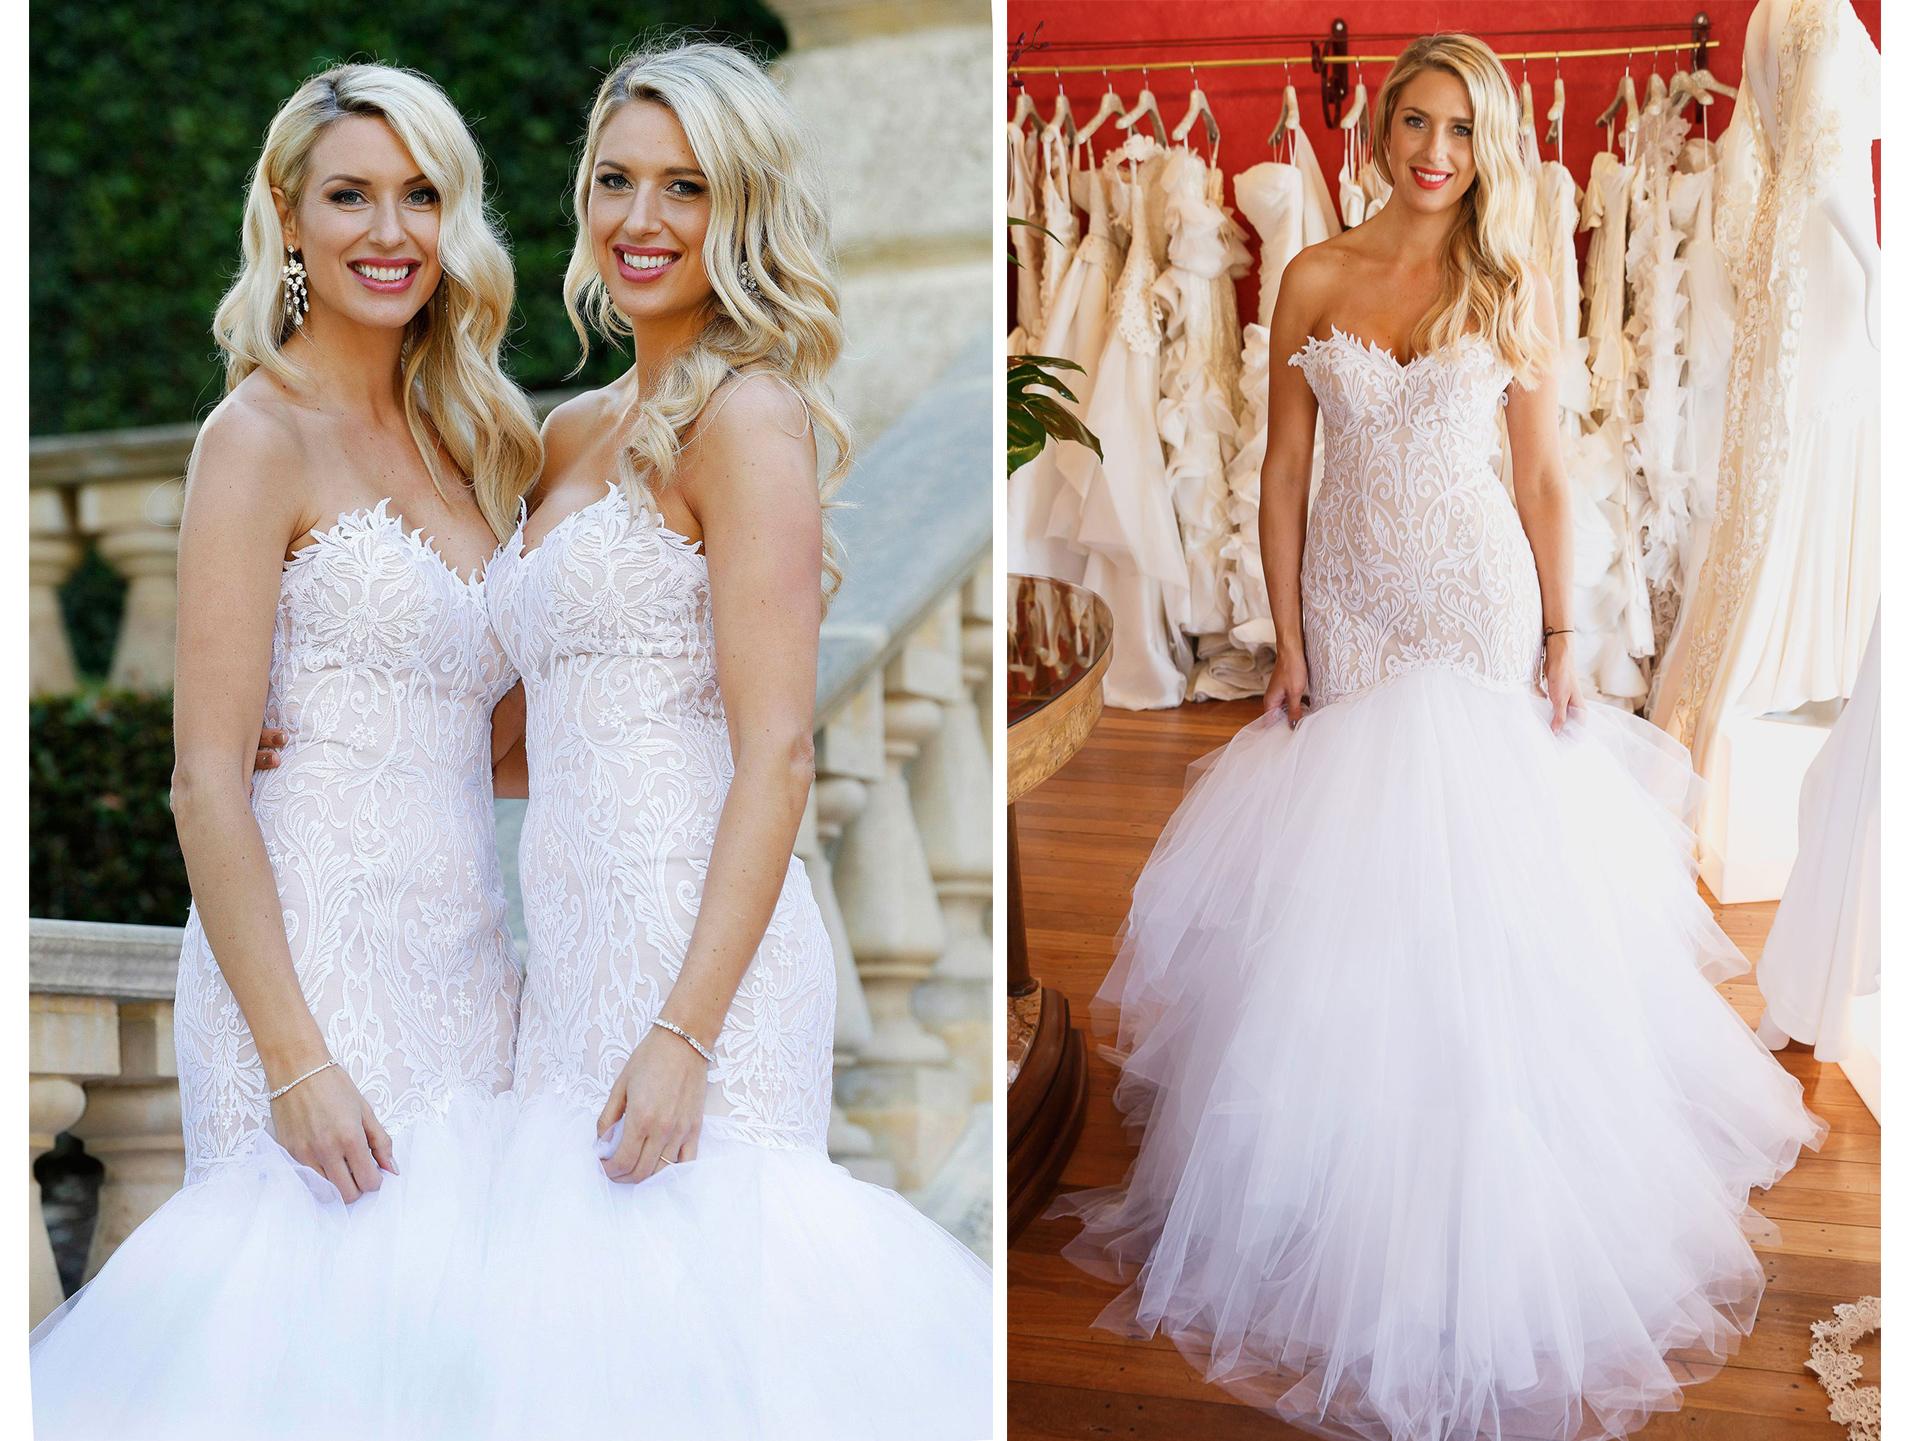 The best and worst Married At First Sight wedding dresses